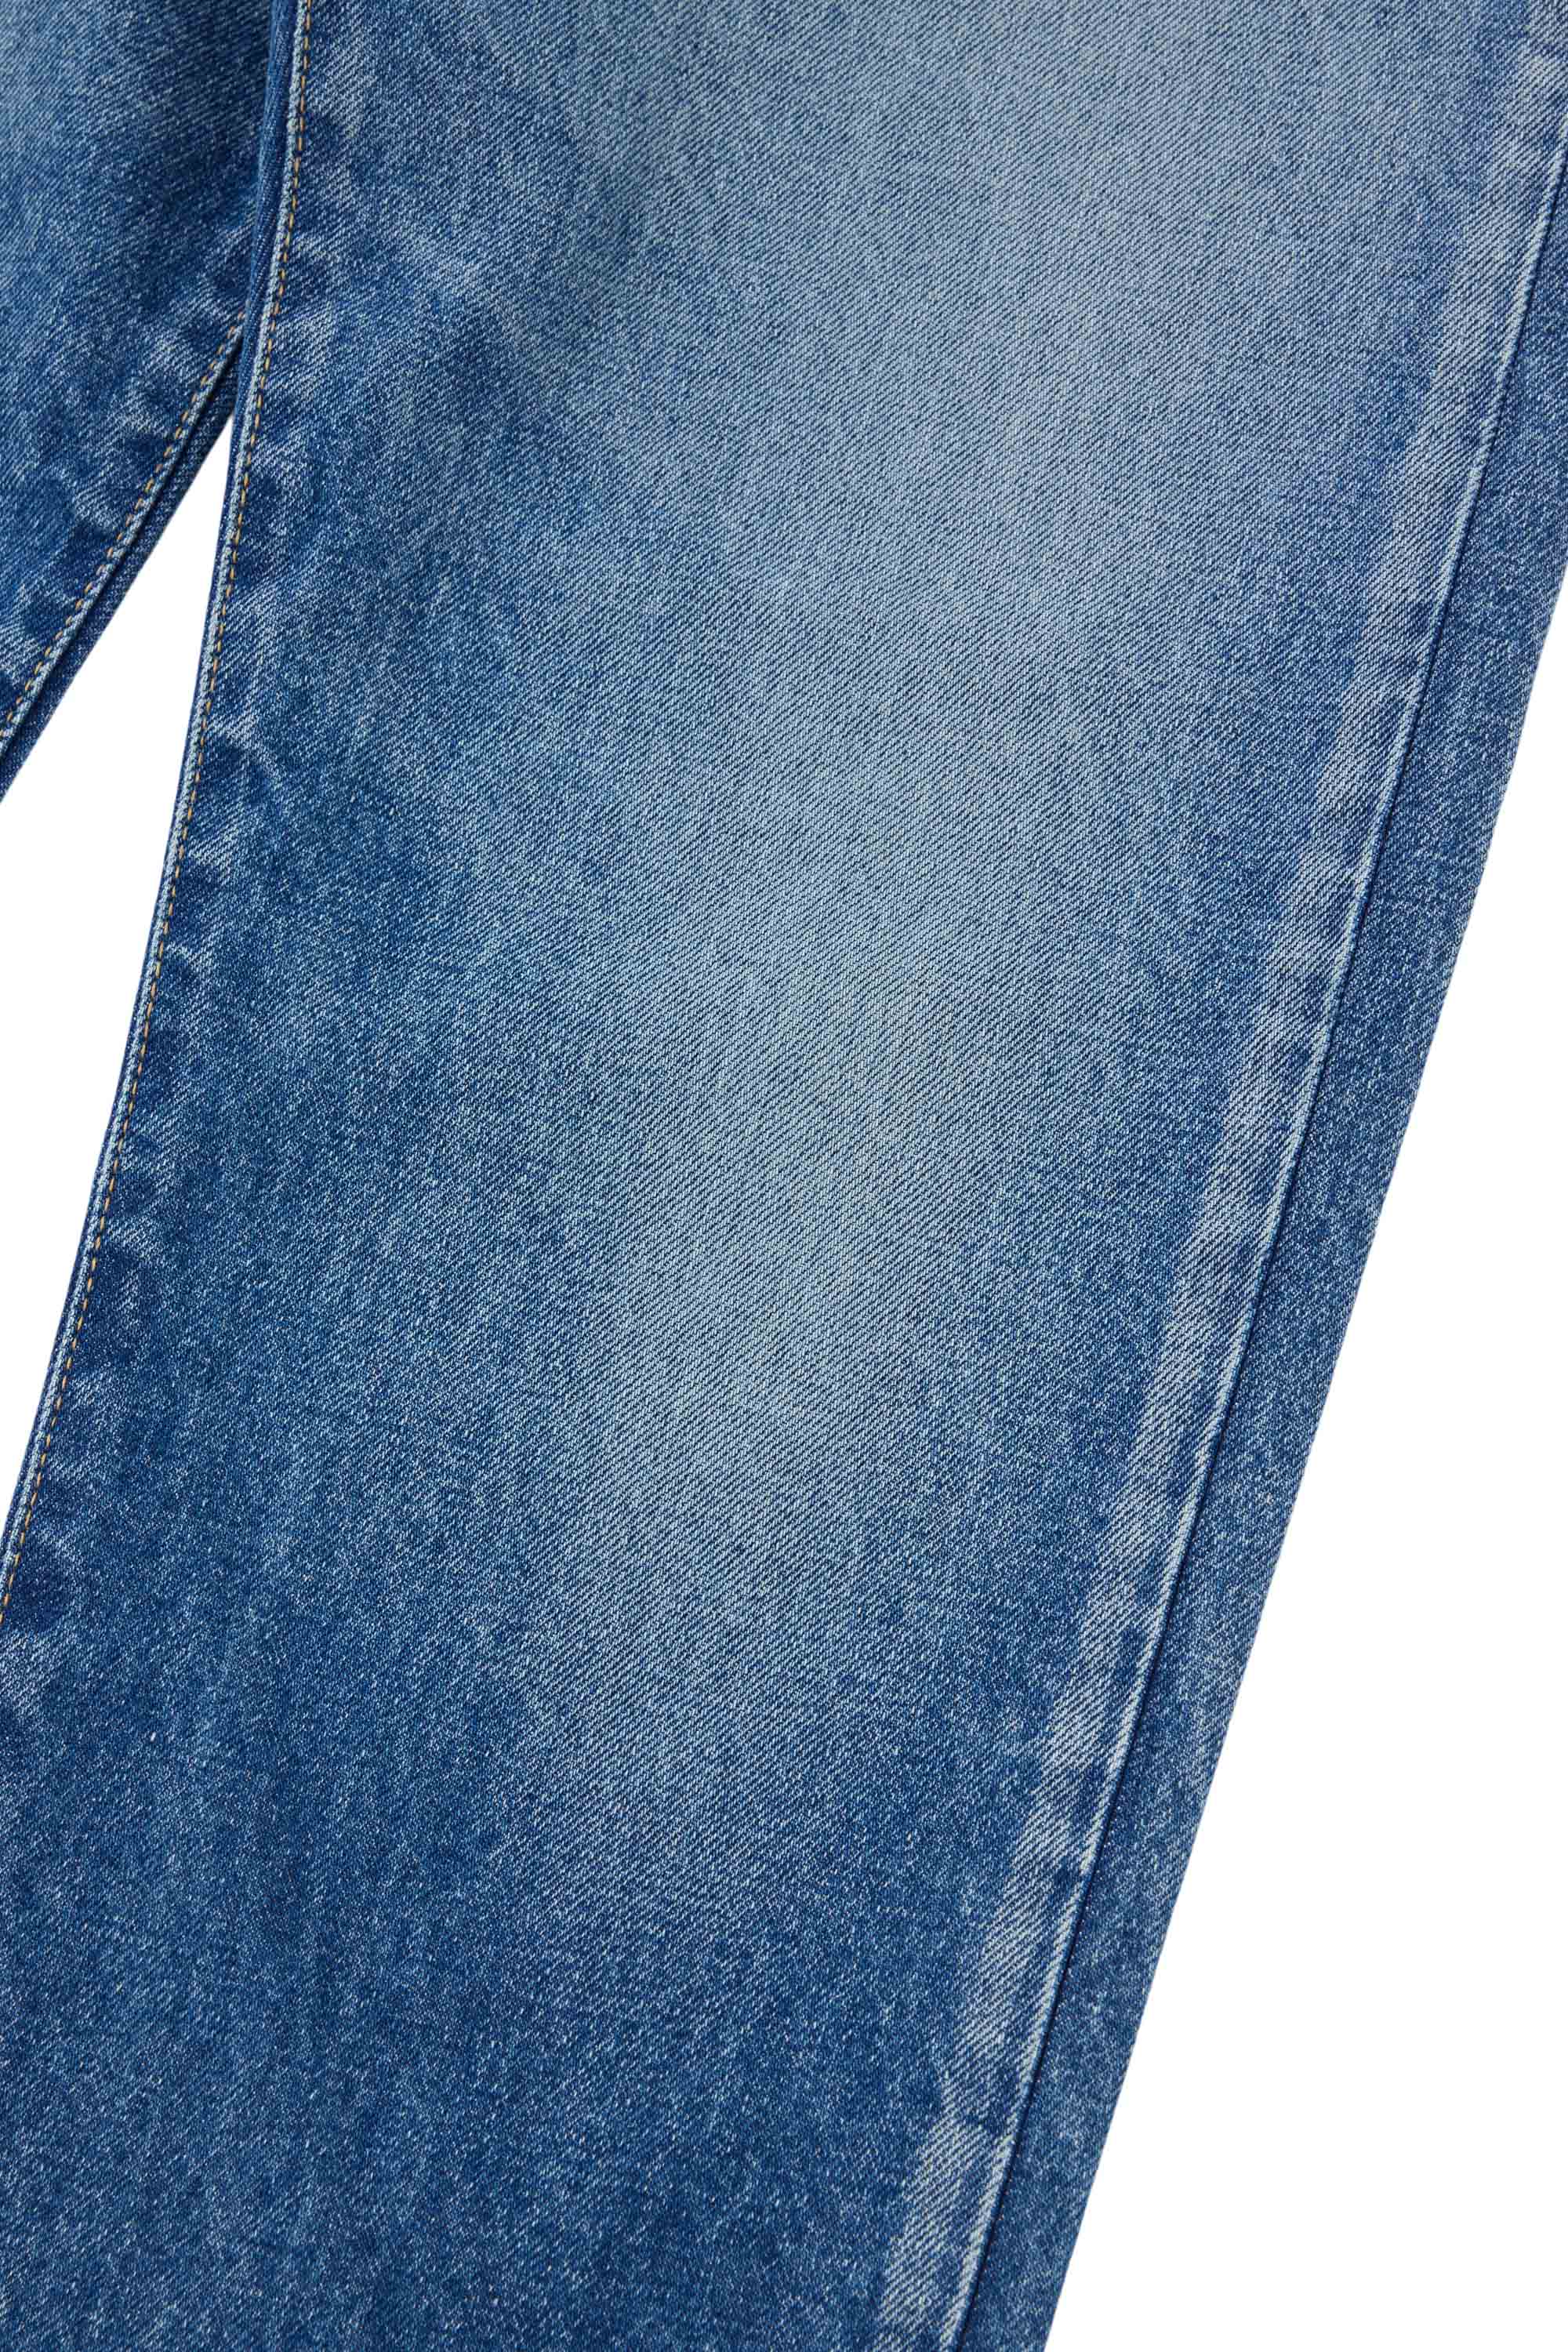 Moussy Denim Foxwoods Straight Jeans in Blue